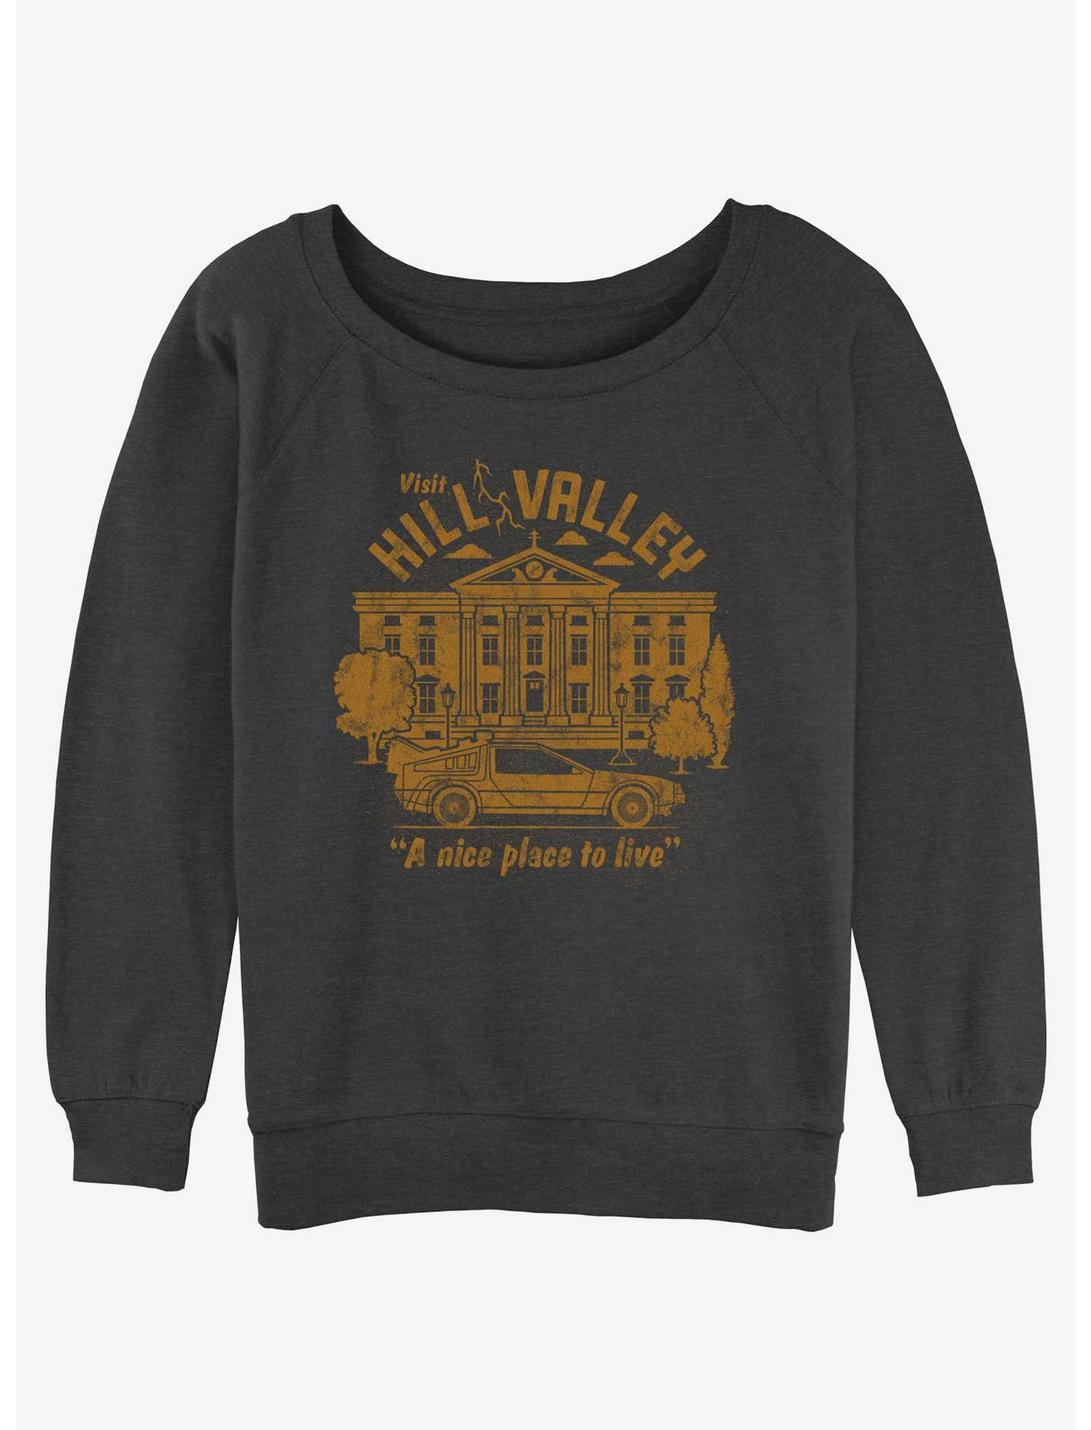 Back to the Future Visit Hill Valley Womens Slouchy Sweatshirt, CHAR HTR, hi-res